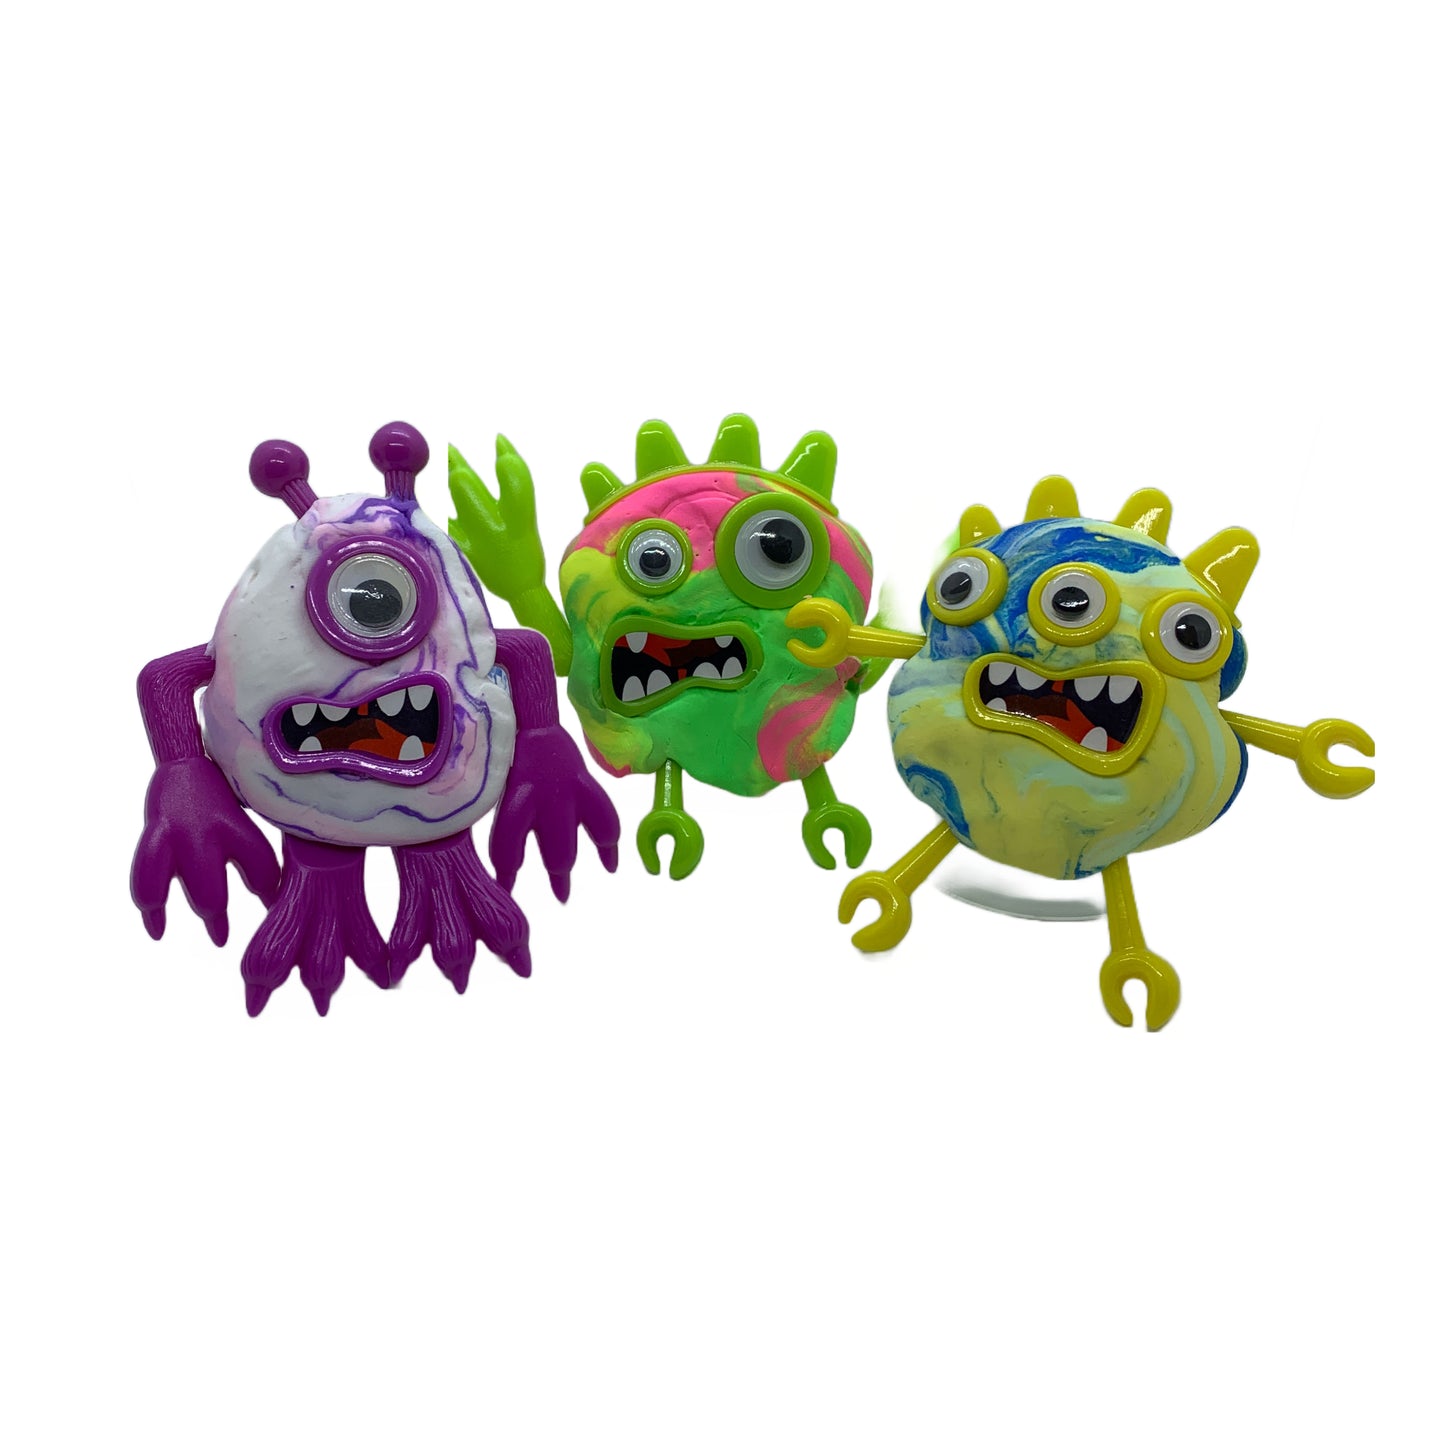 Make Your Own Putty Monster Party Activity Kit- 6 KITS